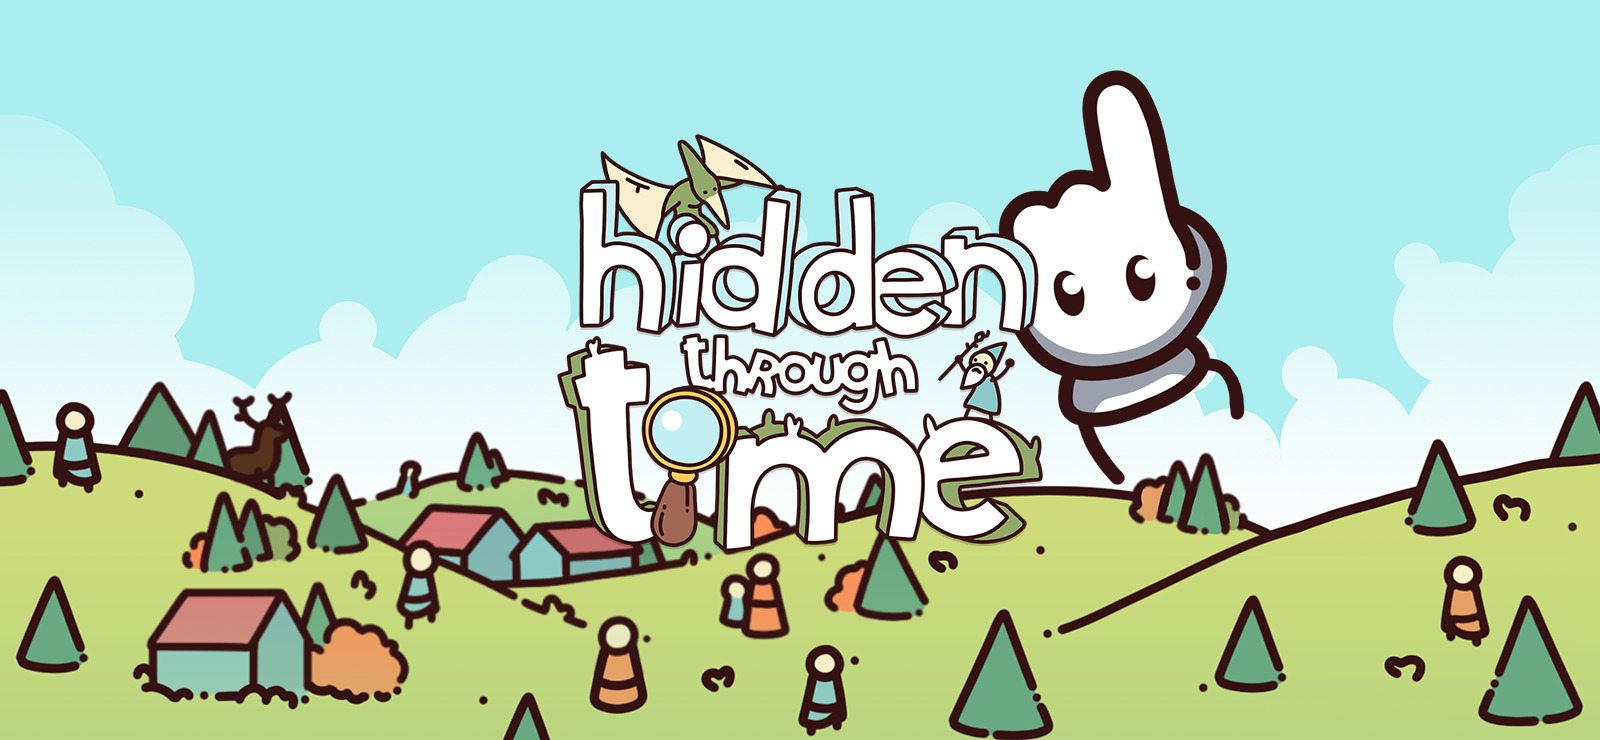 Hidden Through Time review: a relaxing yet challenging puzzle game